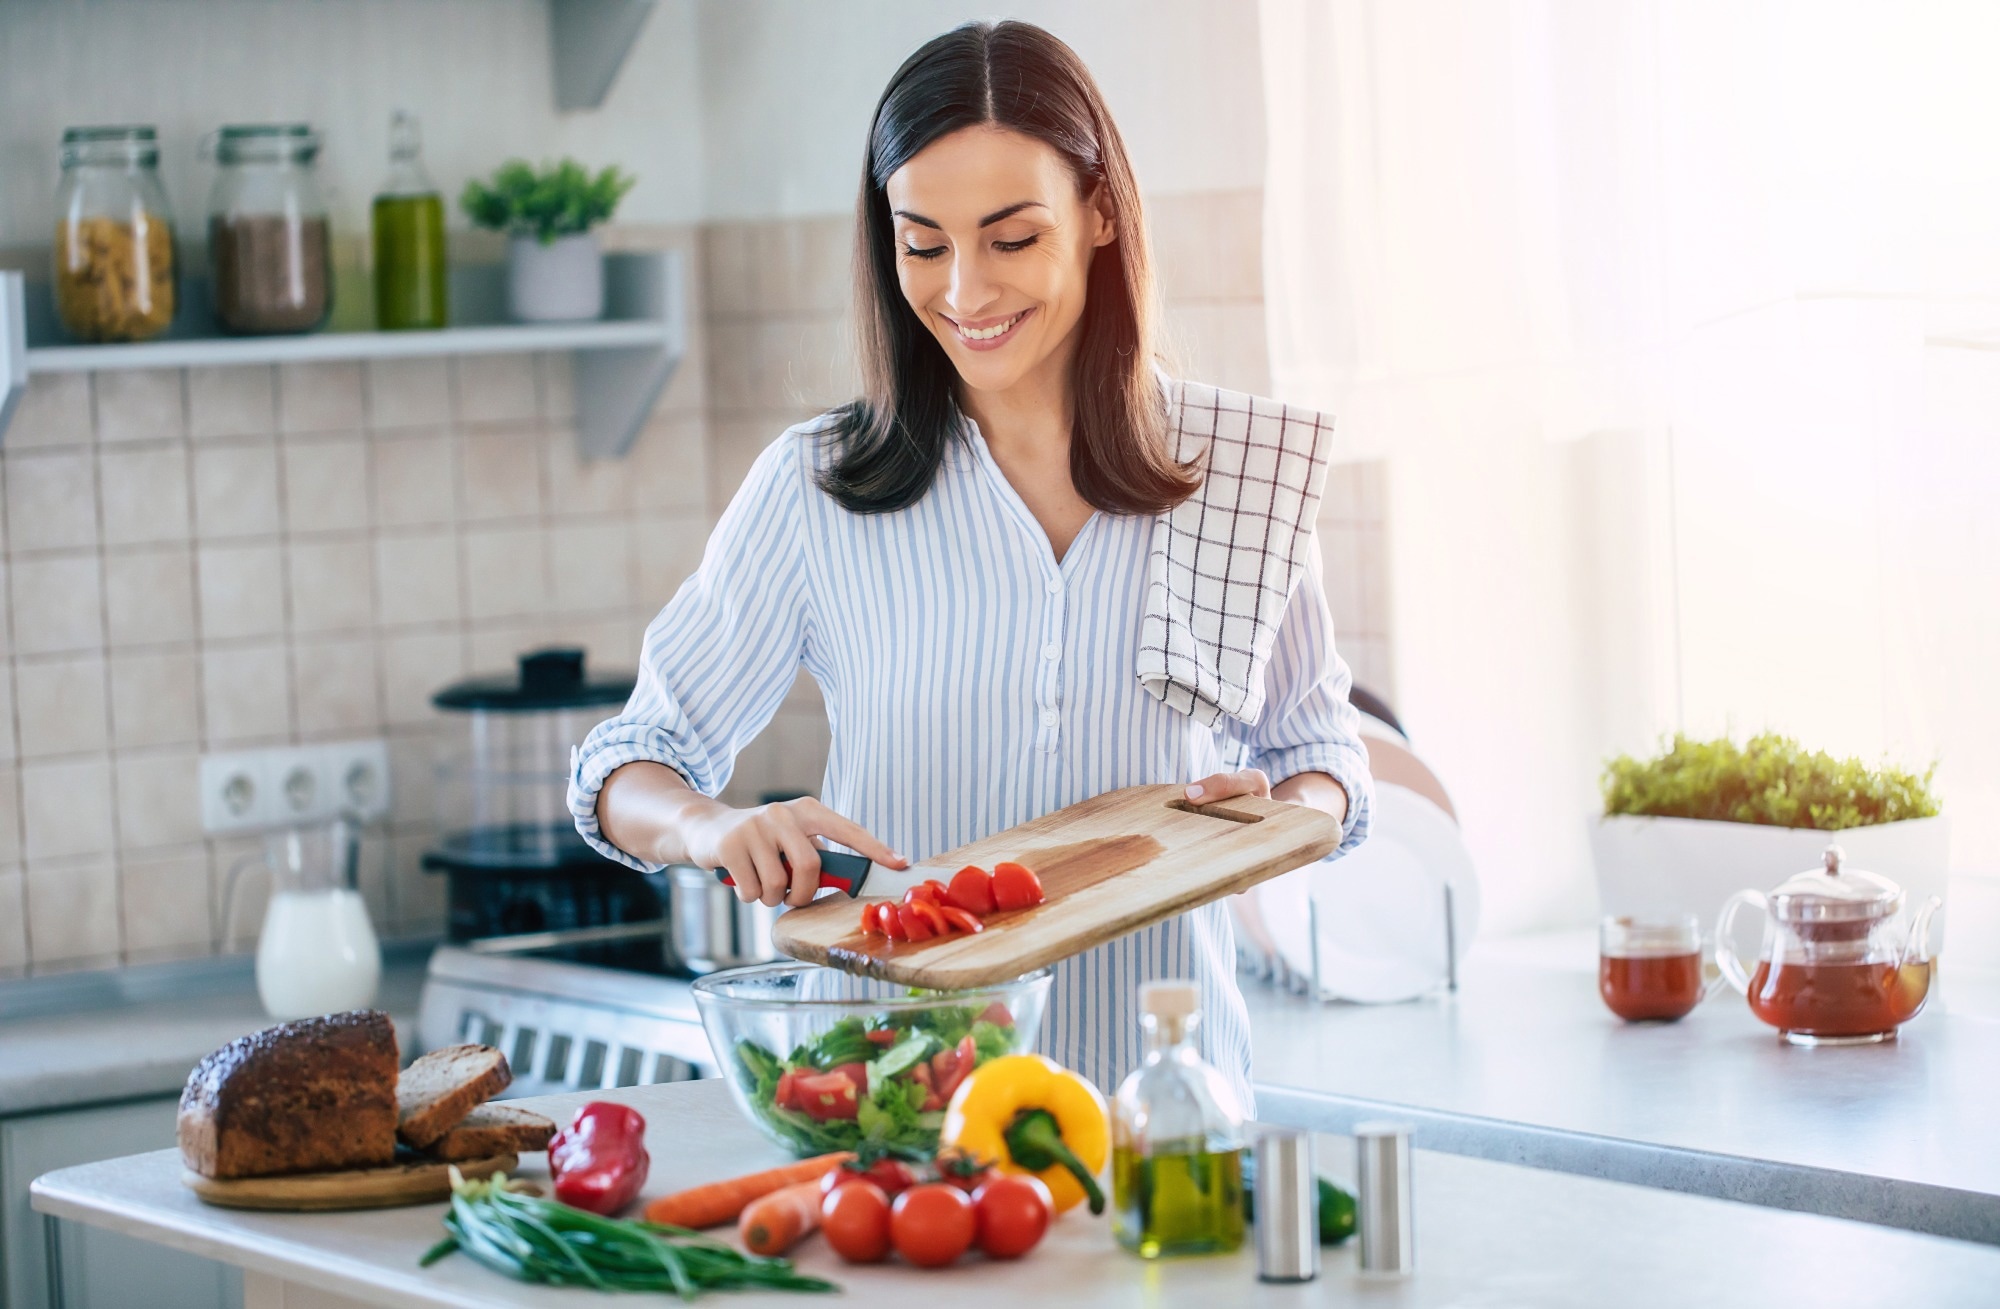 Study: Food values and personality traits in the United States and Norway. Image Credit: My Ocean Production / Shutterstock.com